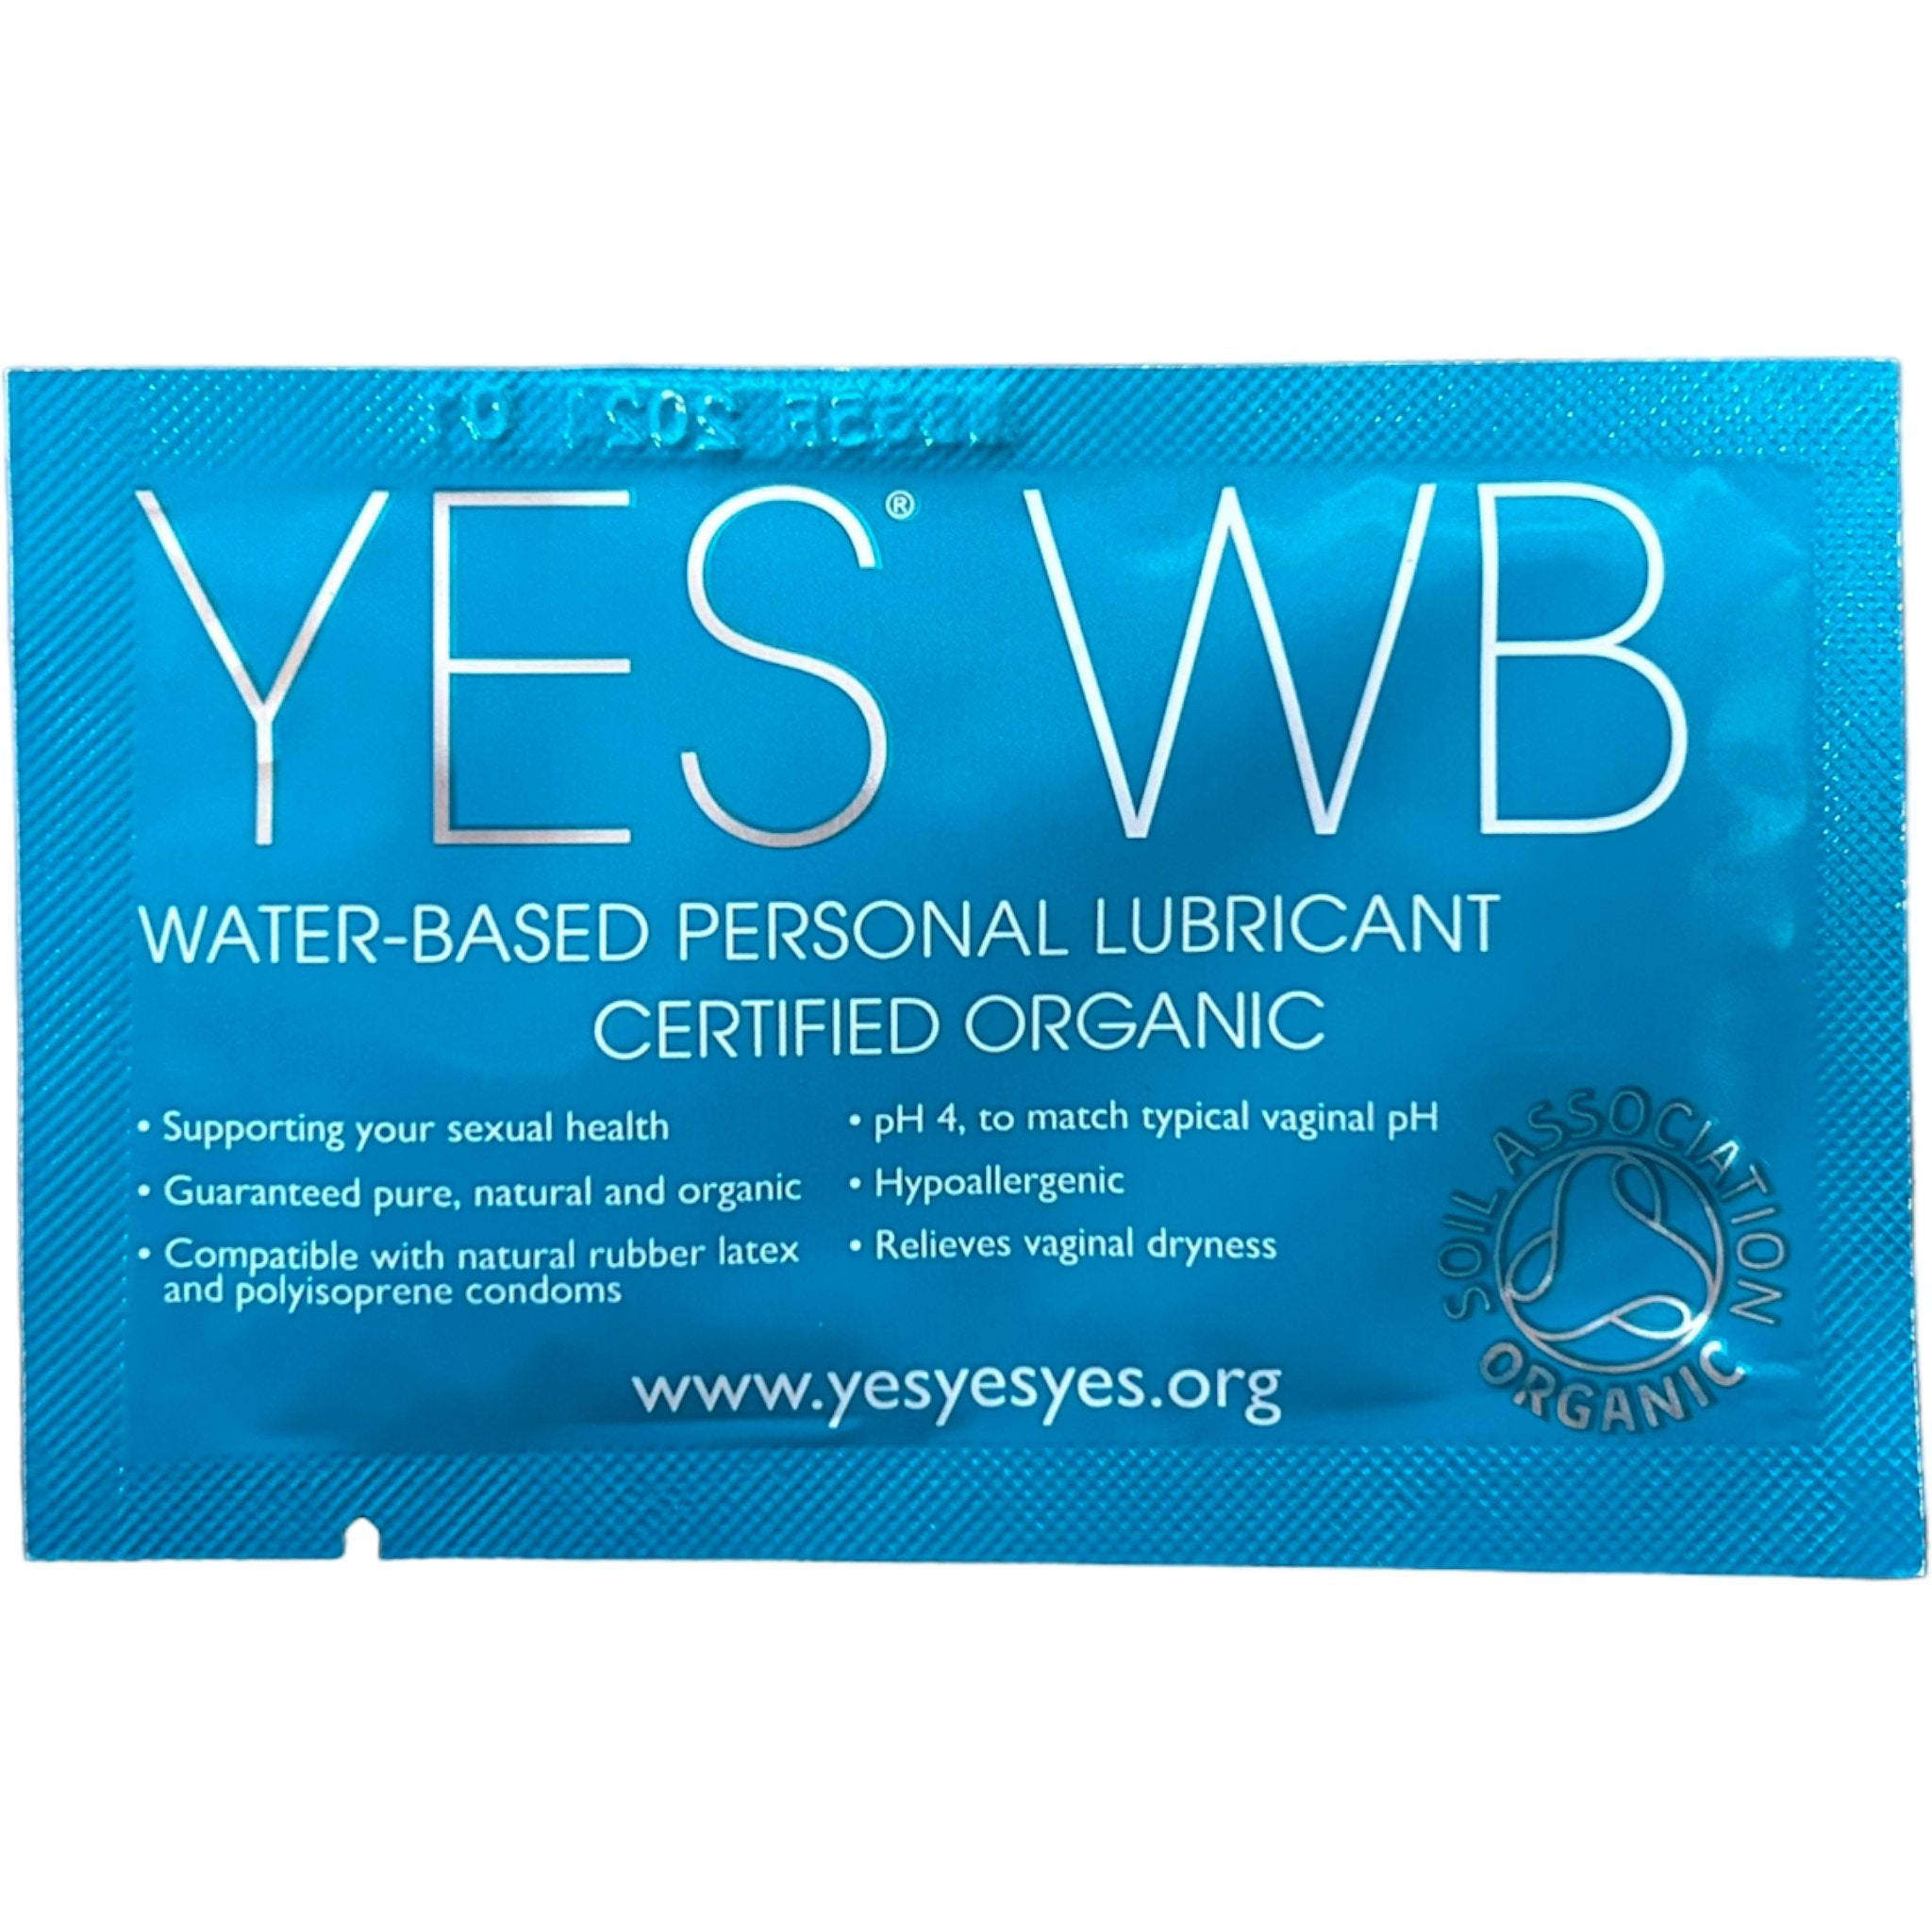 Water-Based Organic Personal Lubricant - mypure.co.uk